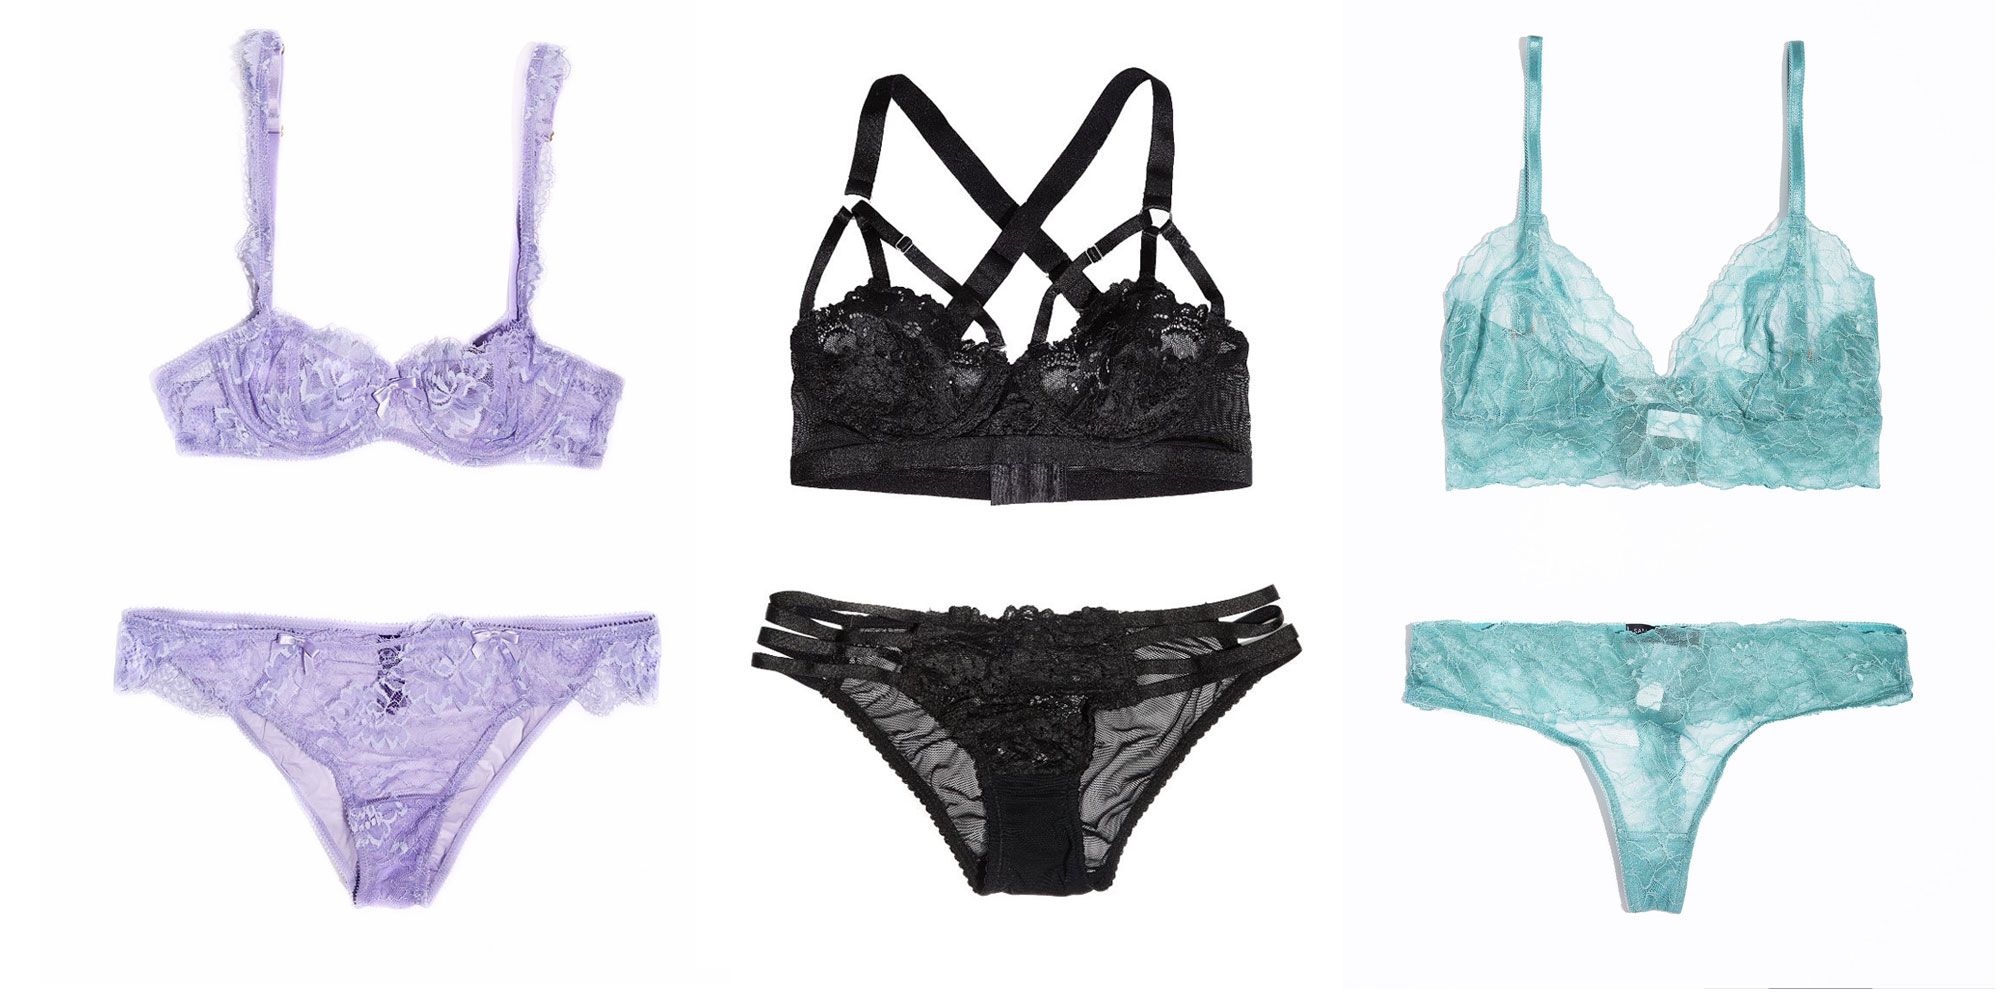 Why Buy Sexy Lingerie… Even If You're Single